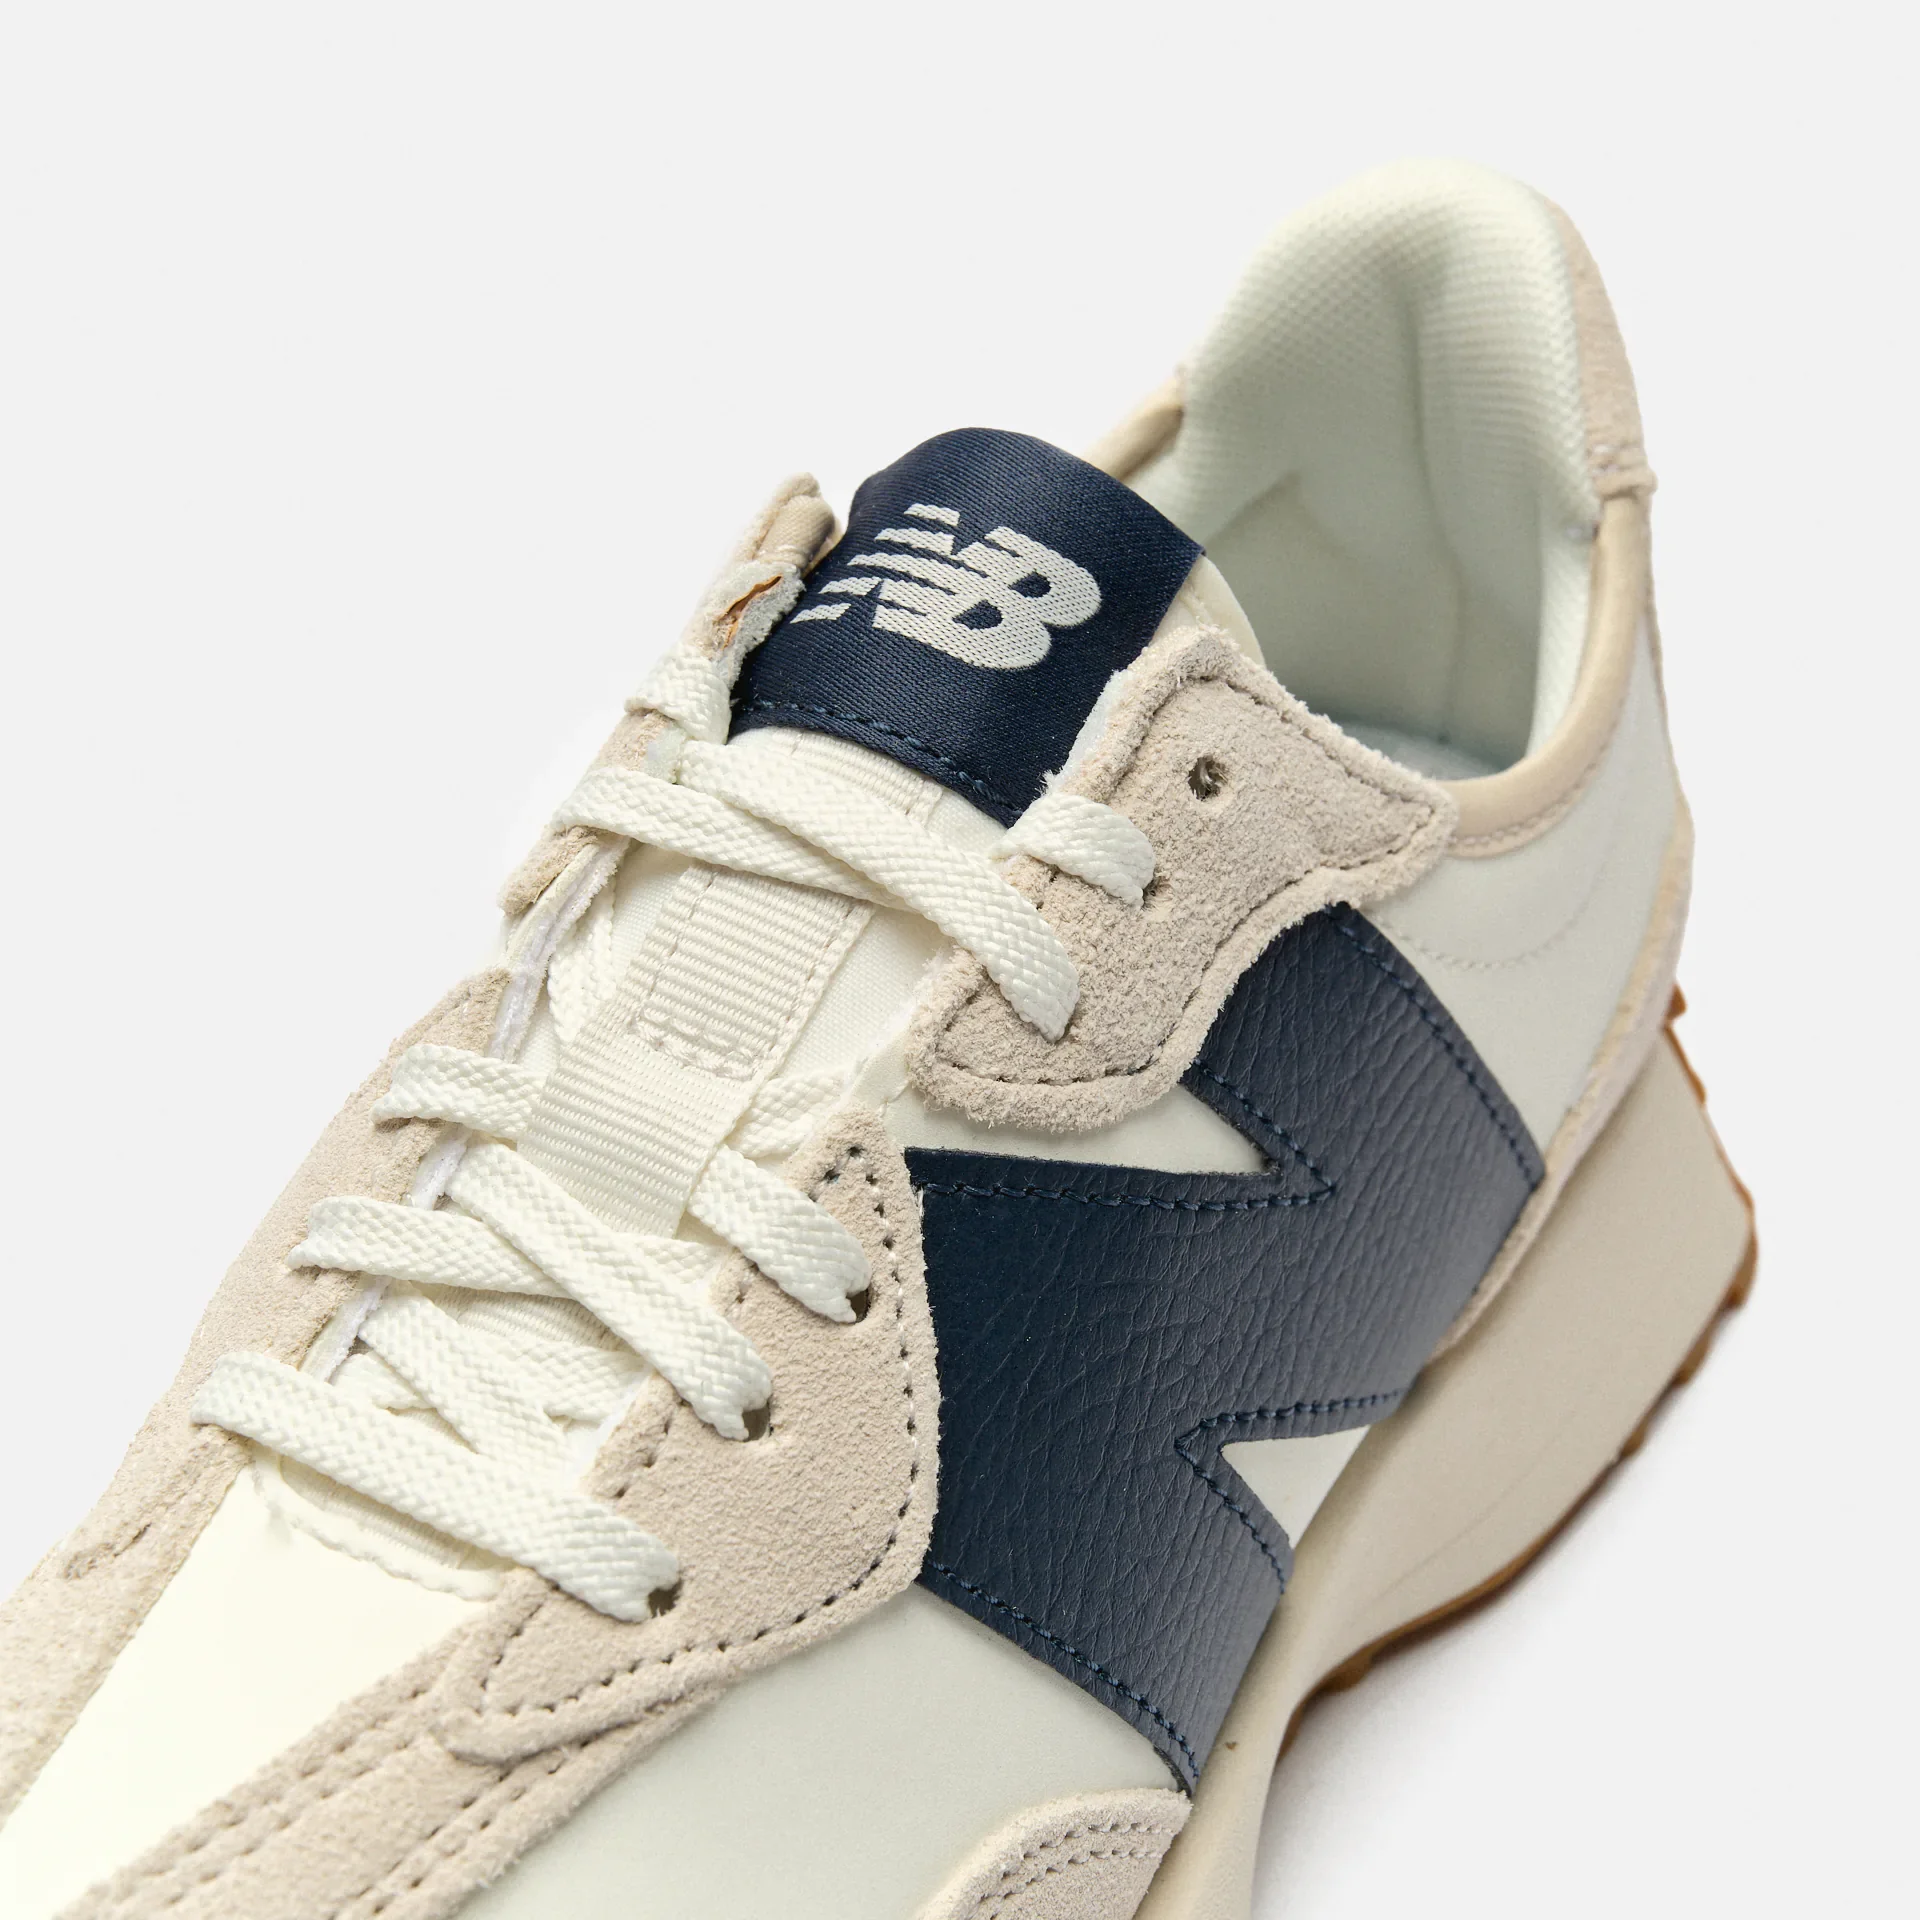 New Balance WS327 Lifestyle Sneaker Moonbeam/Outerspace